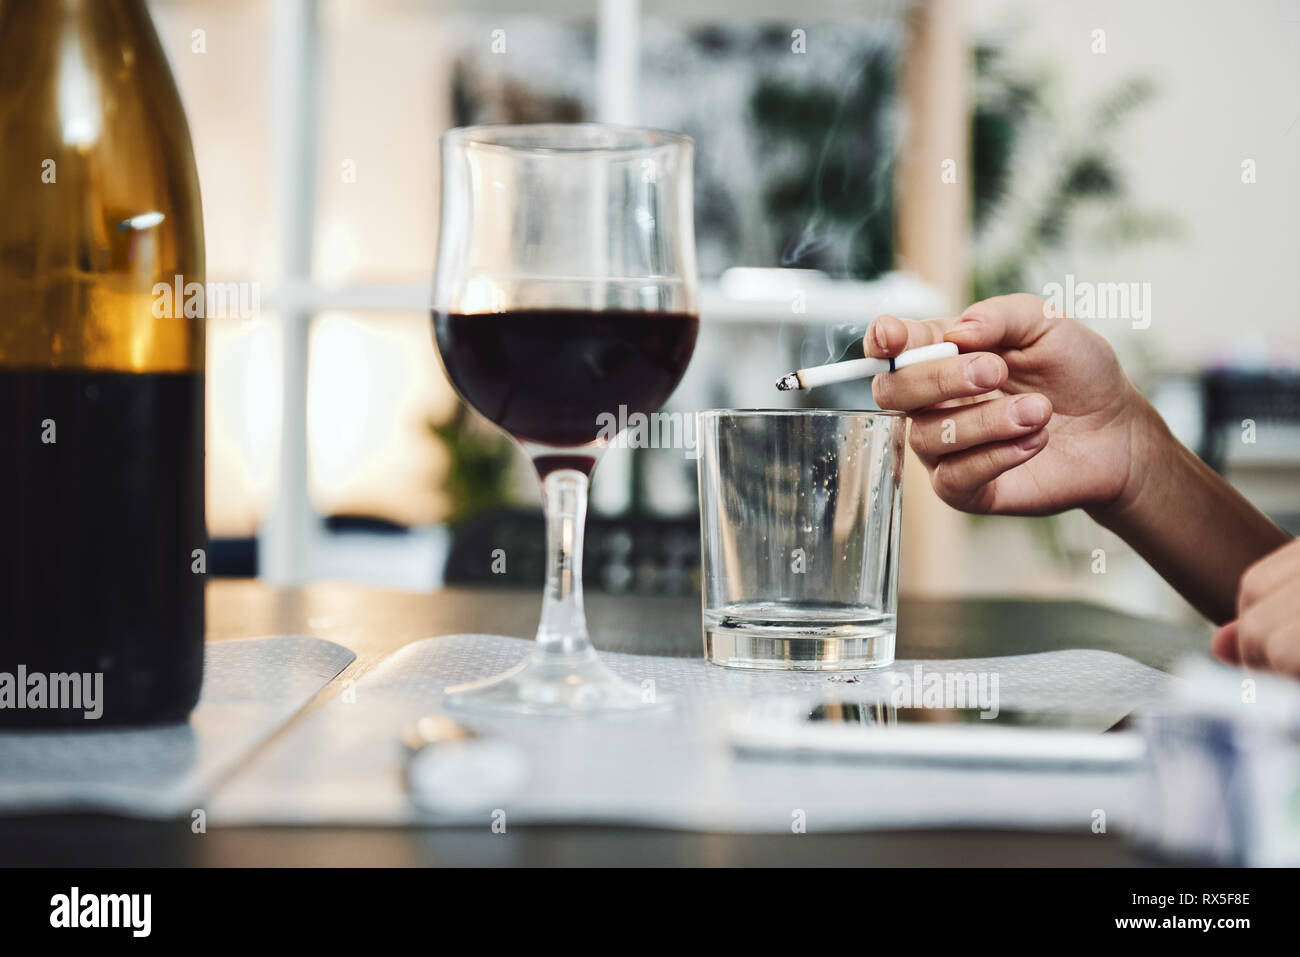 Hand holding a cigarette. Using of empty glass as an ashtray. A bottle and glass of red wine are on the table. Stock Photo